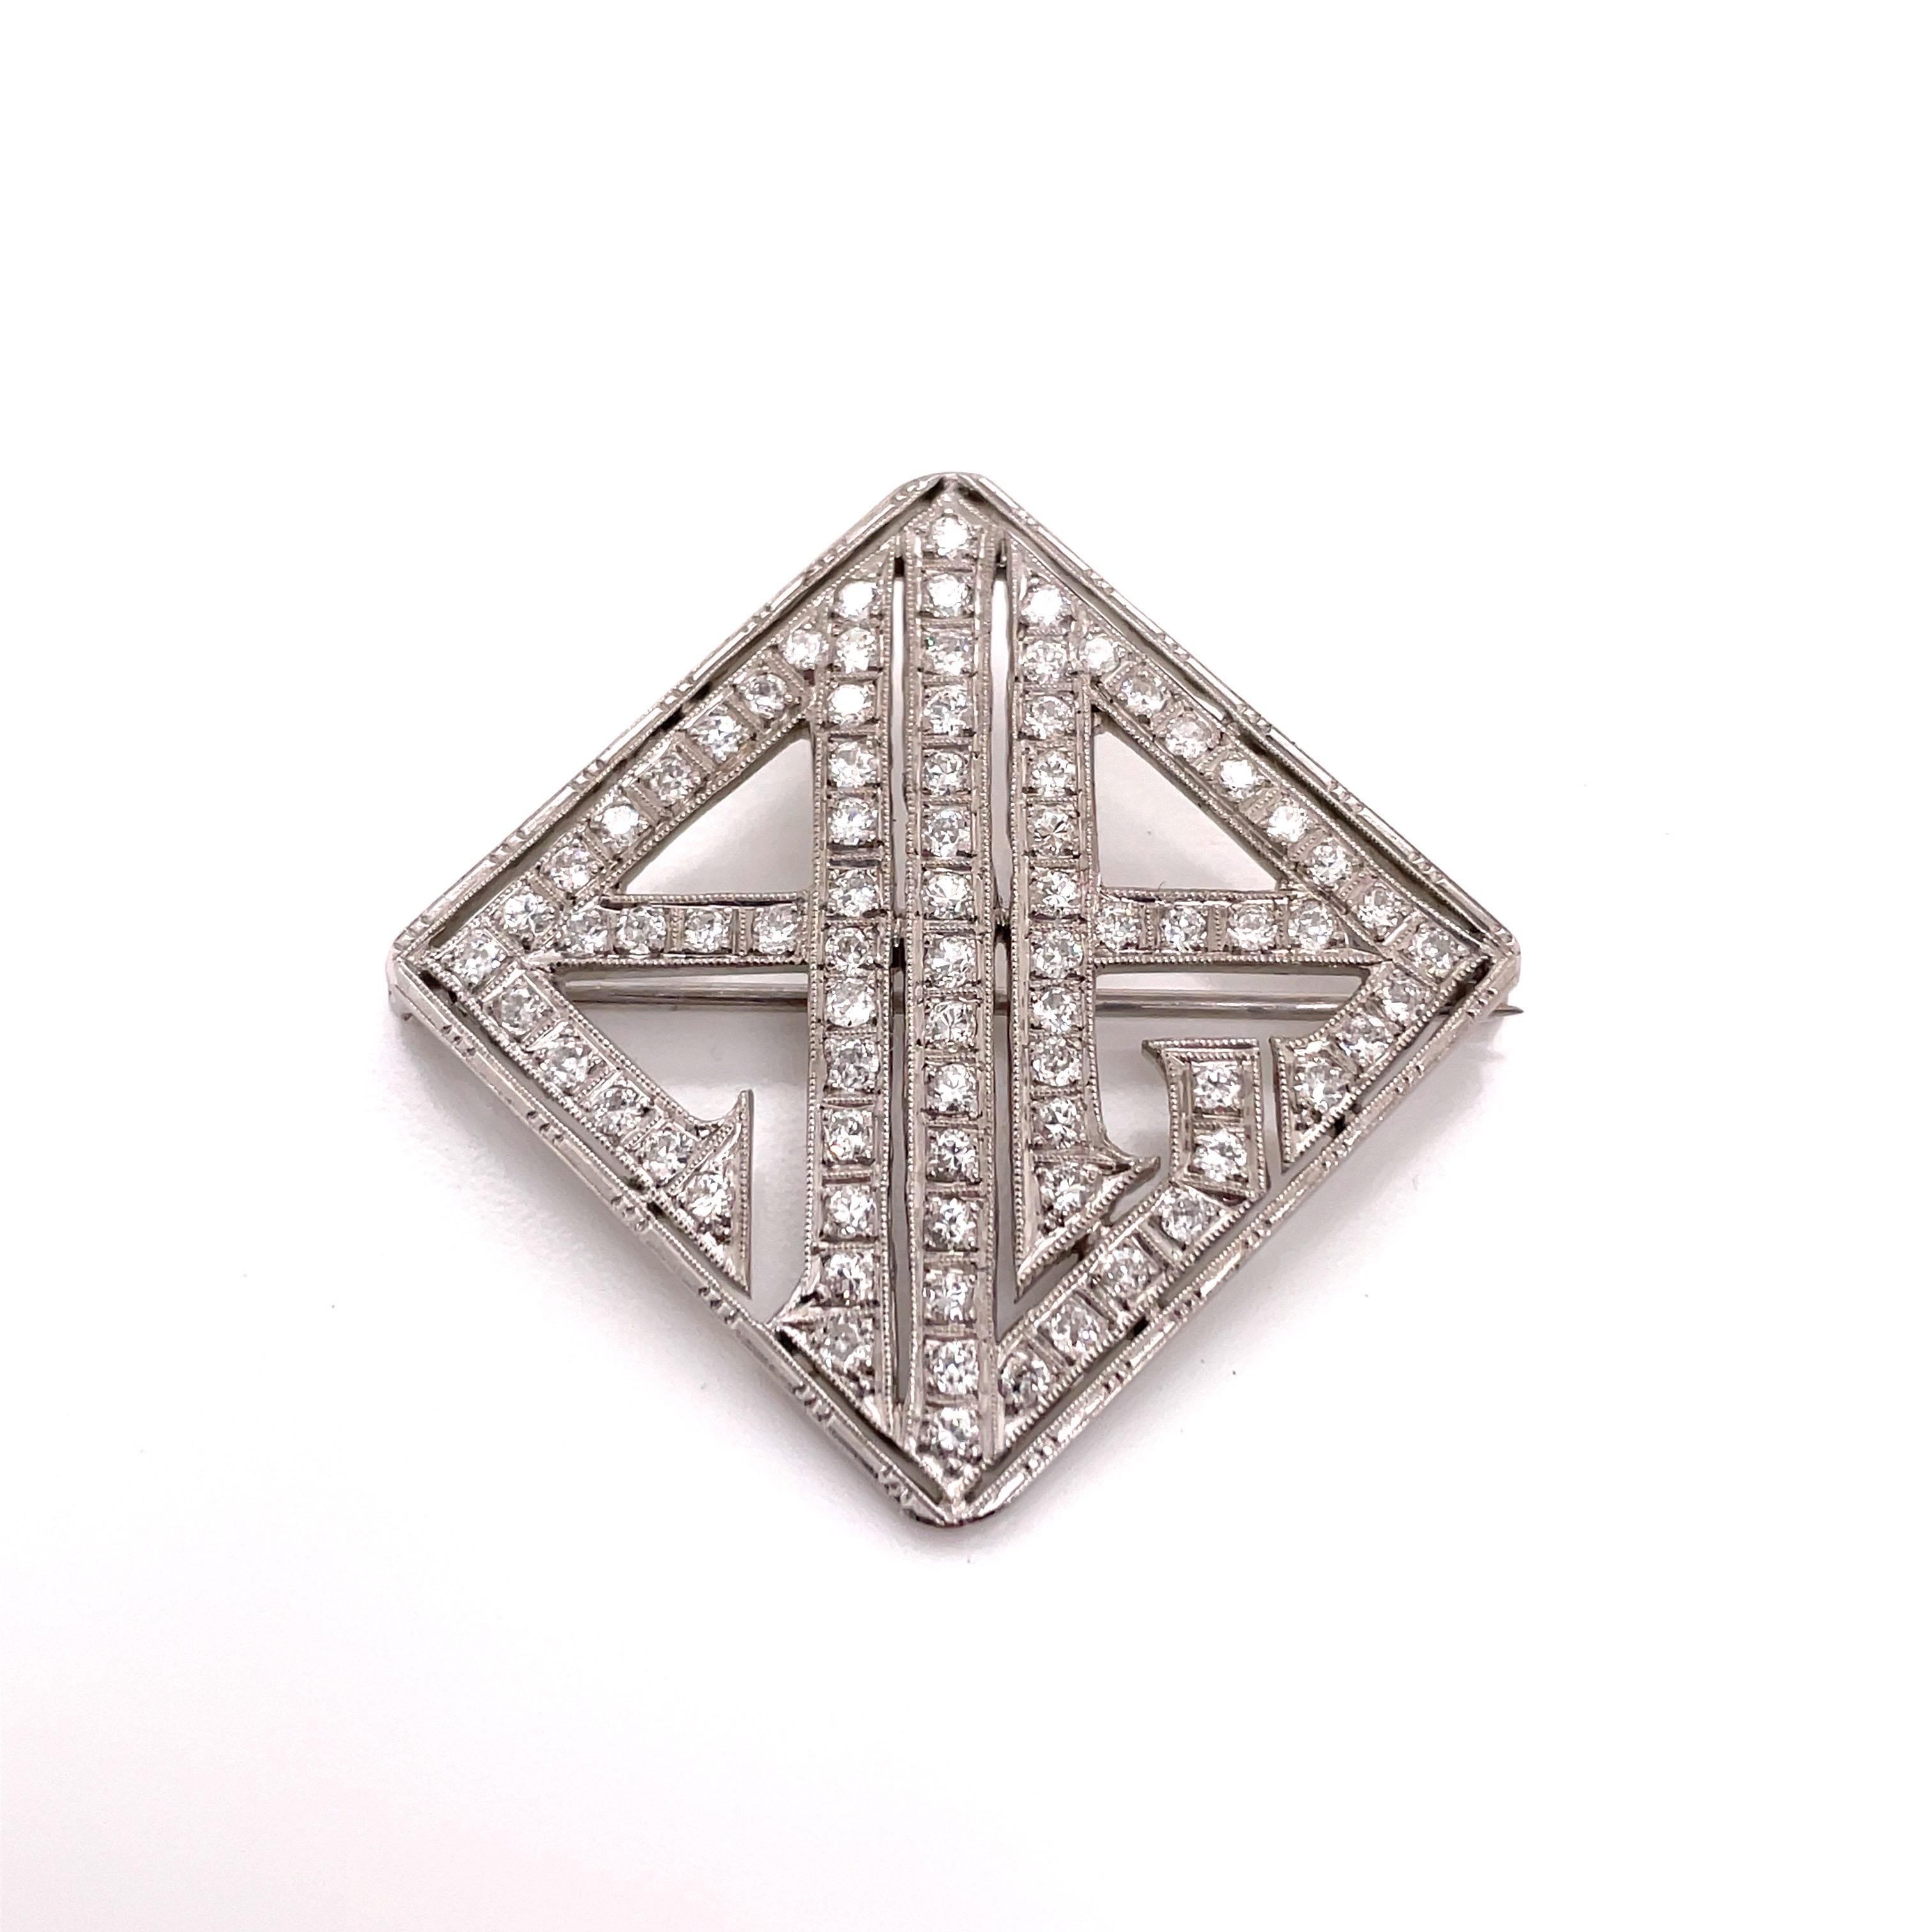 Platinum Art Deco Diamond Monogram A.L.A. Brooch - The brooch is set with 77 round full cut diamonds that weigh approximately 1.50ct total weight. The diamond quality is H - I color and SI1 - I1 clarity. The brooch measures 1.75